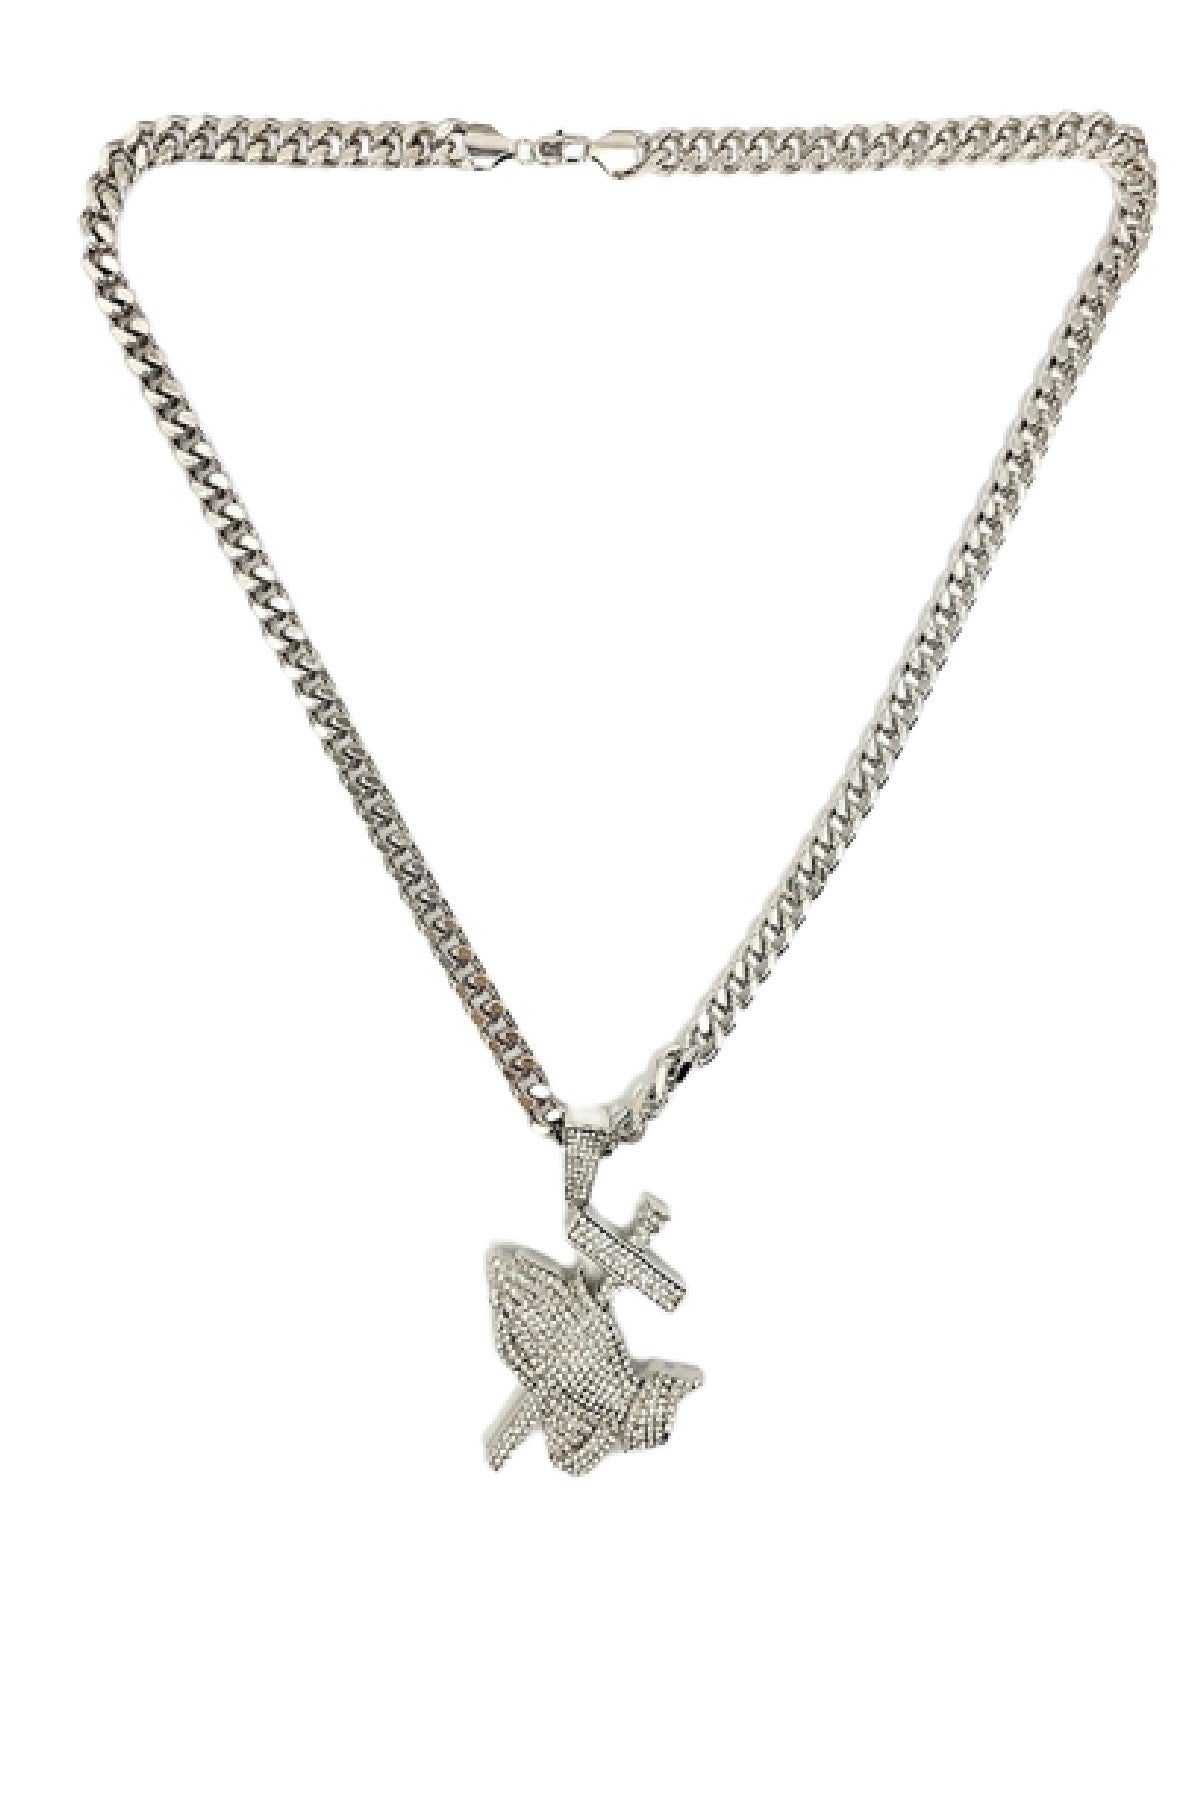 HIP HOP ICED OUT PRAYING HANDS PENDANT CUBAN CHAIN